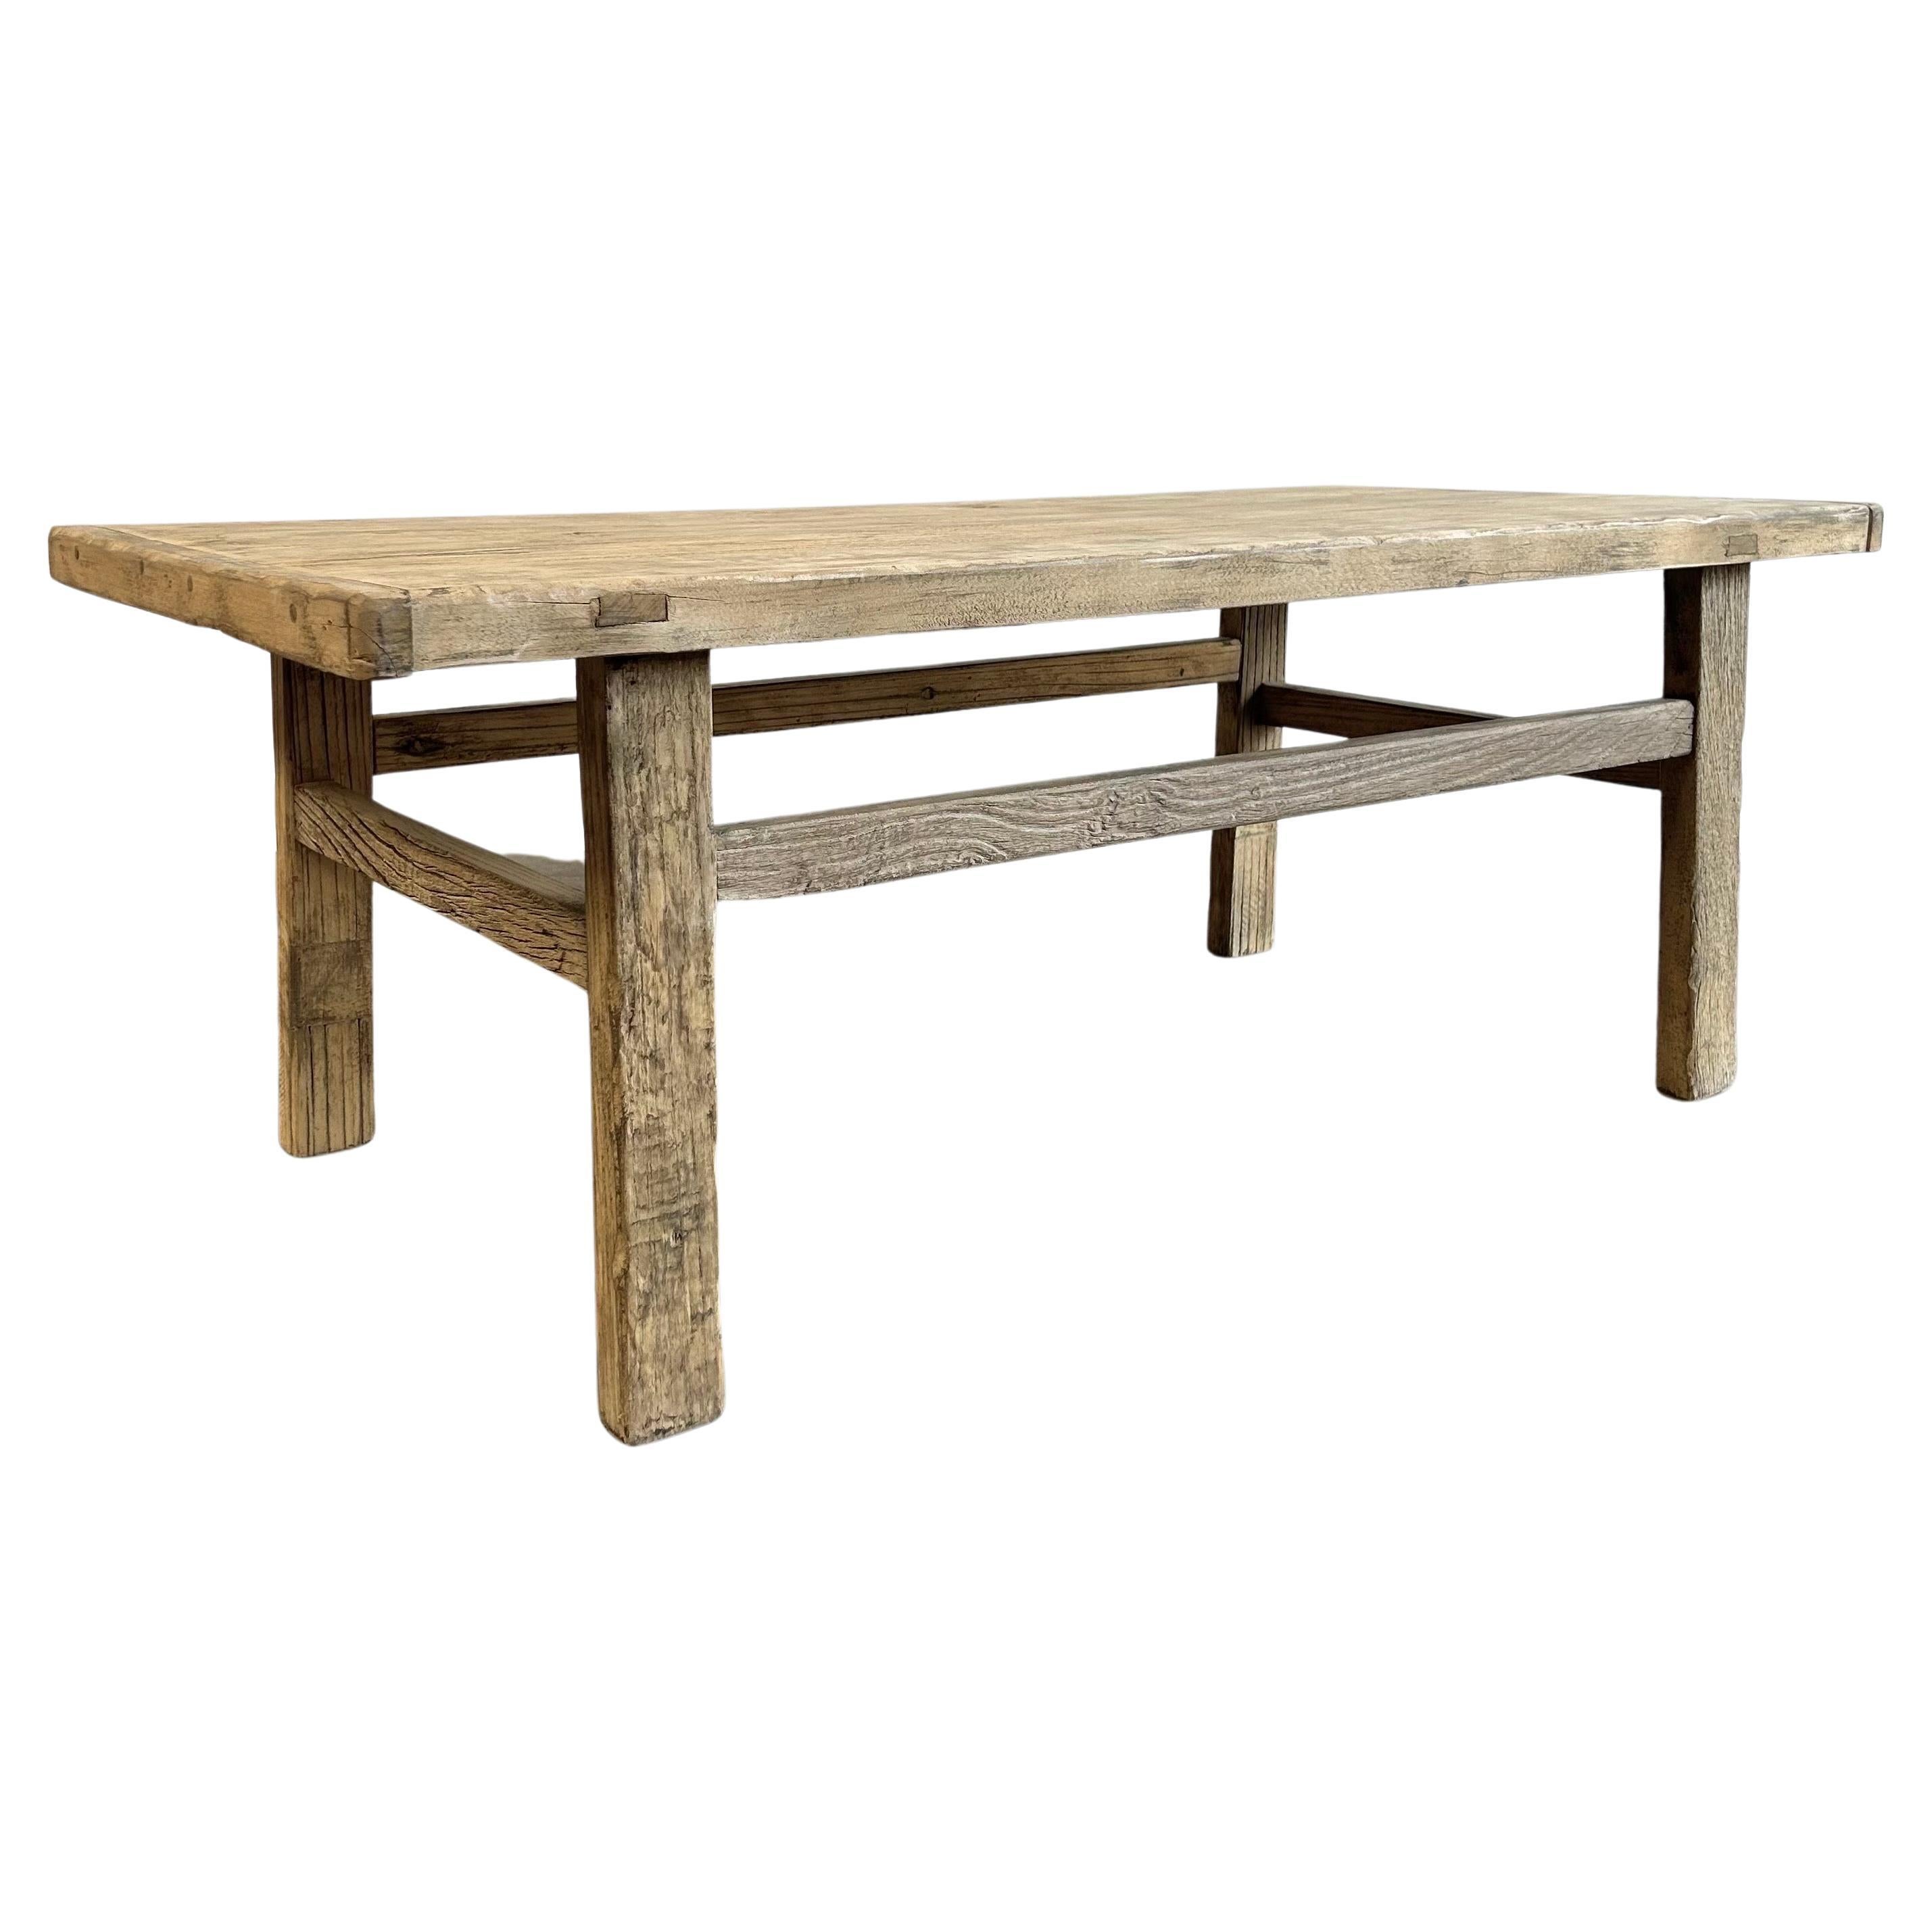 What is the best wood to make a coffee table?